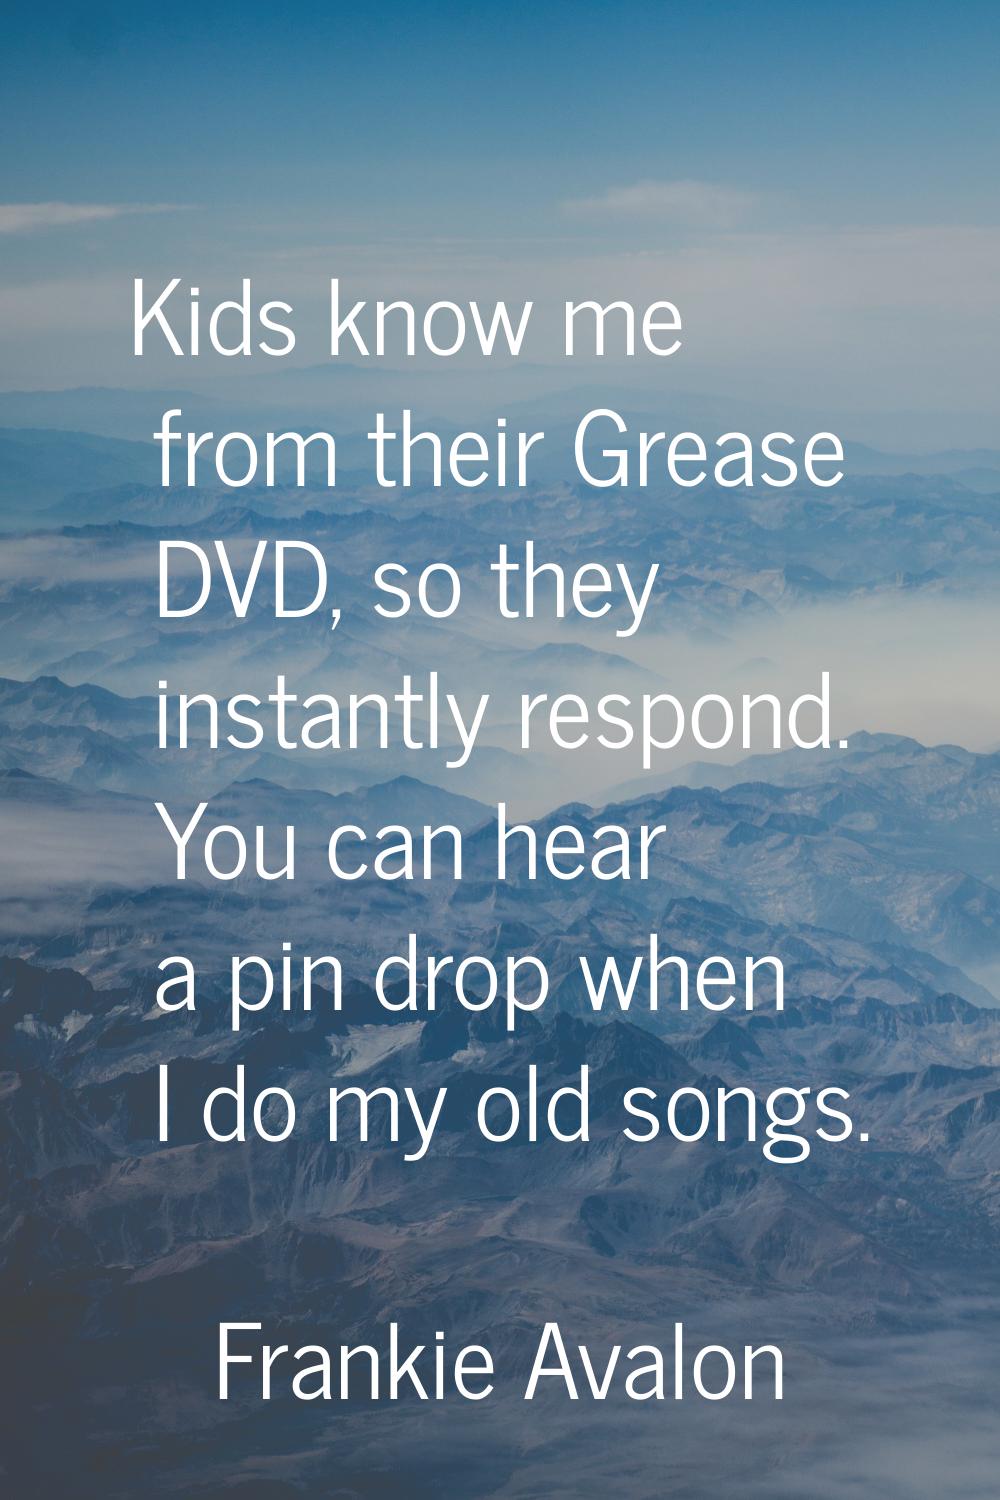 Kids know me from their Grease DVD, so they instantly respond. You can hear a pin drop when I do my